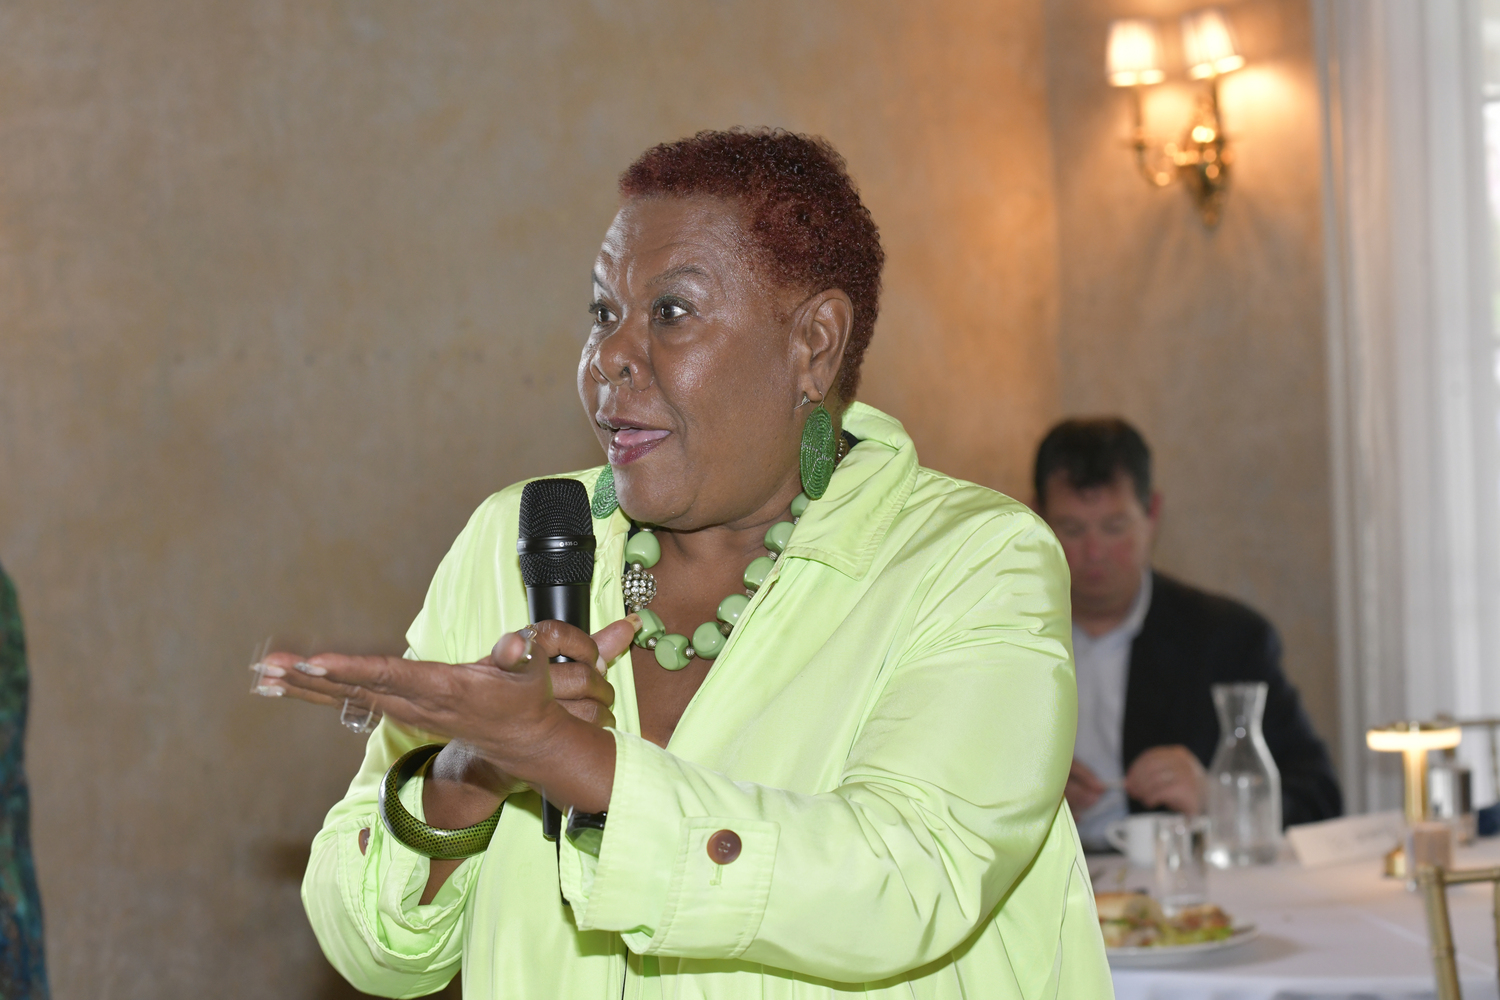 Brenda Simmons makes a point at the Express Sessions event on September 28.  DANA SHAW